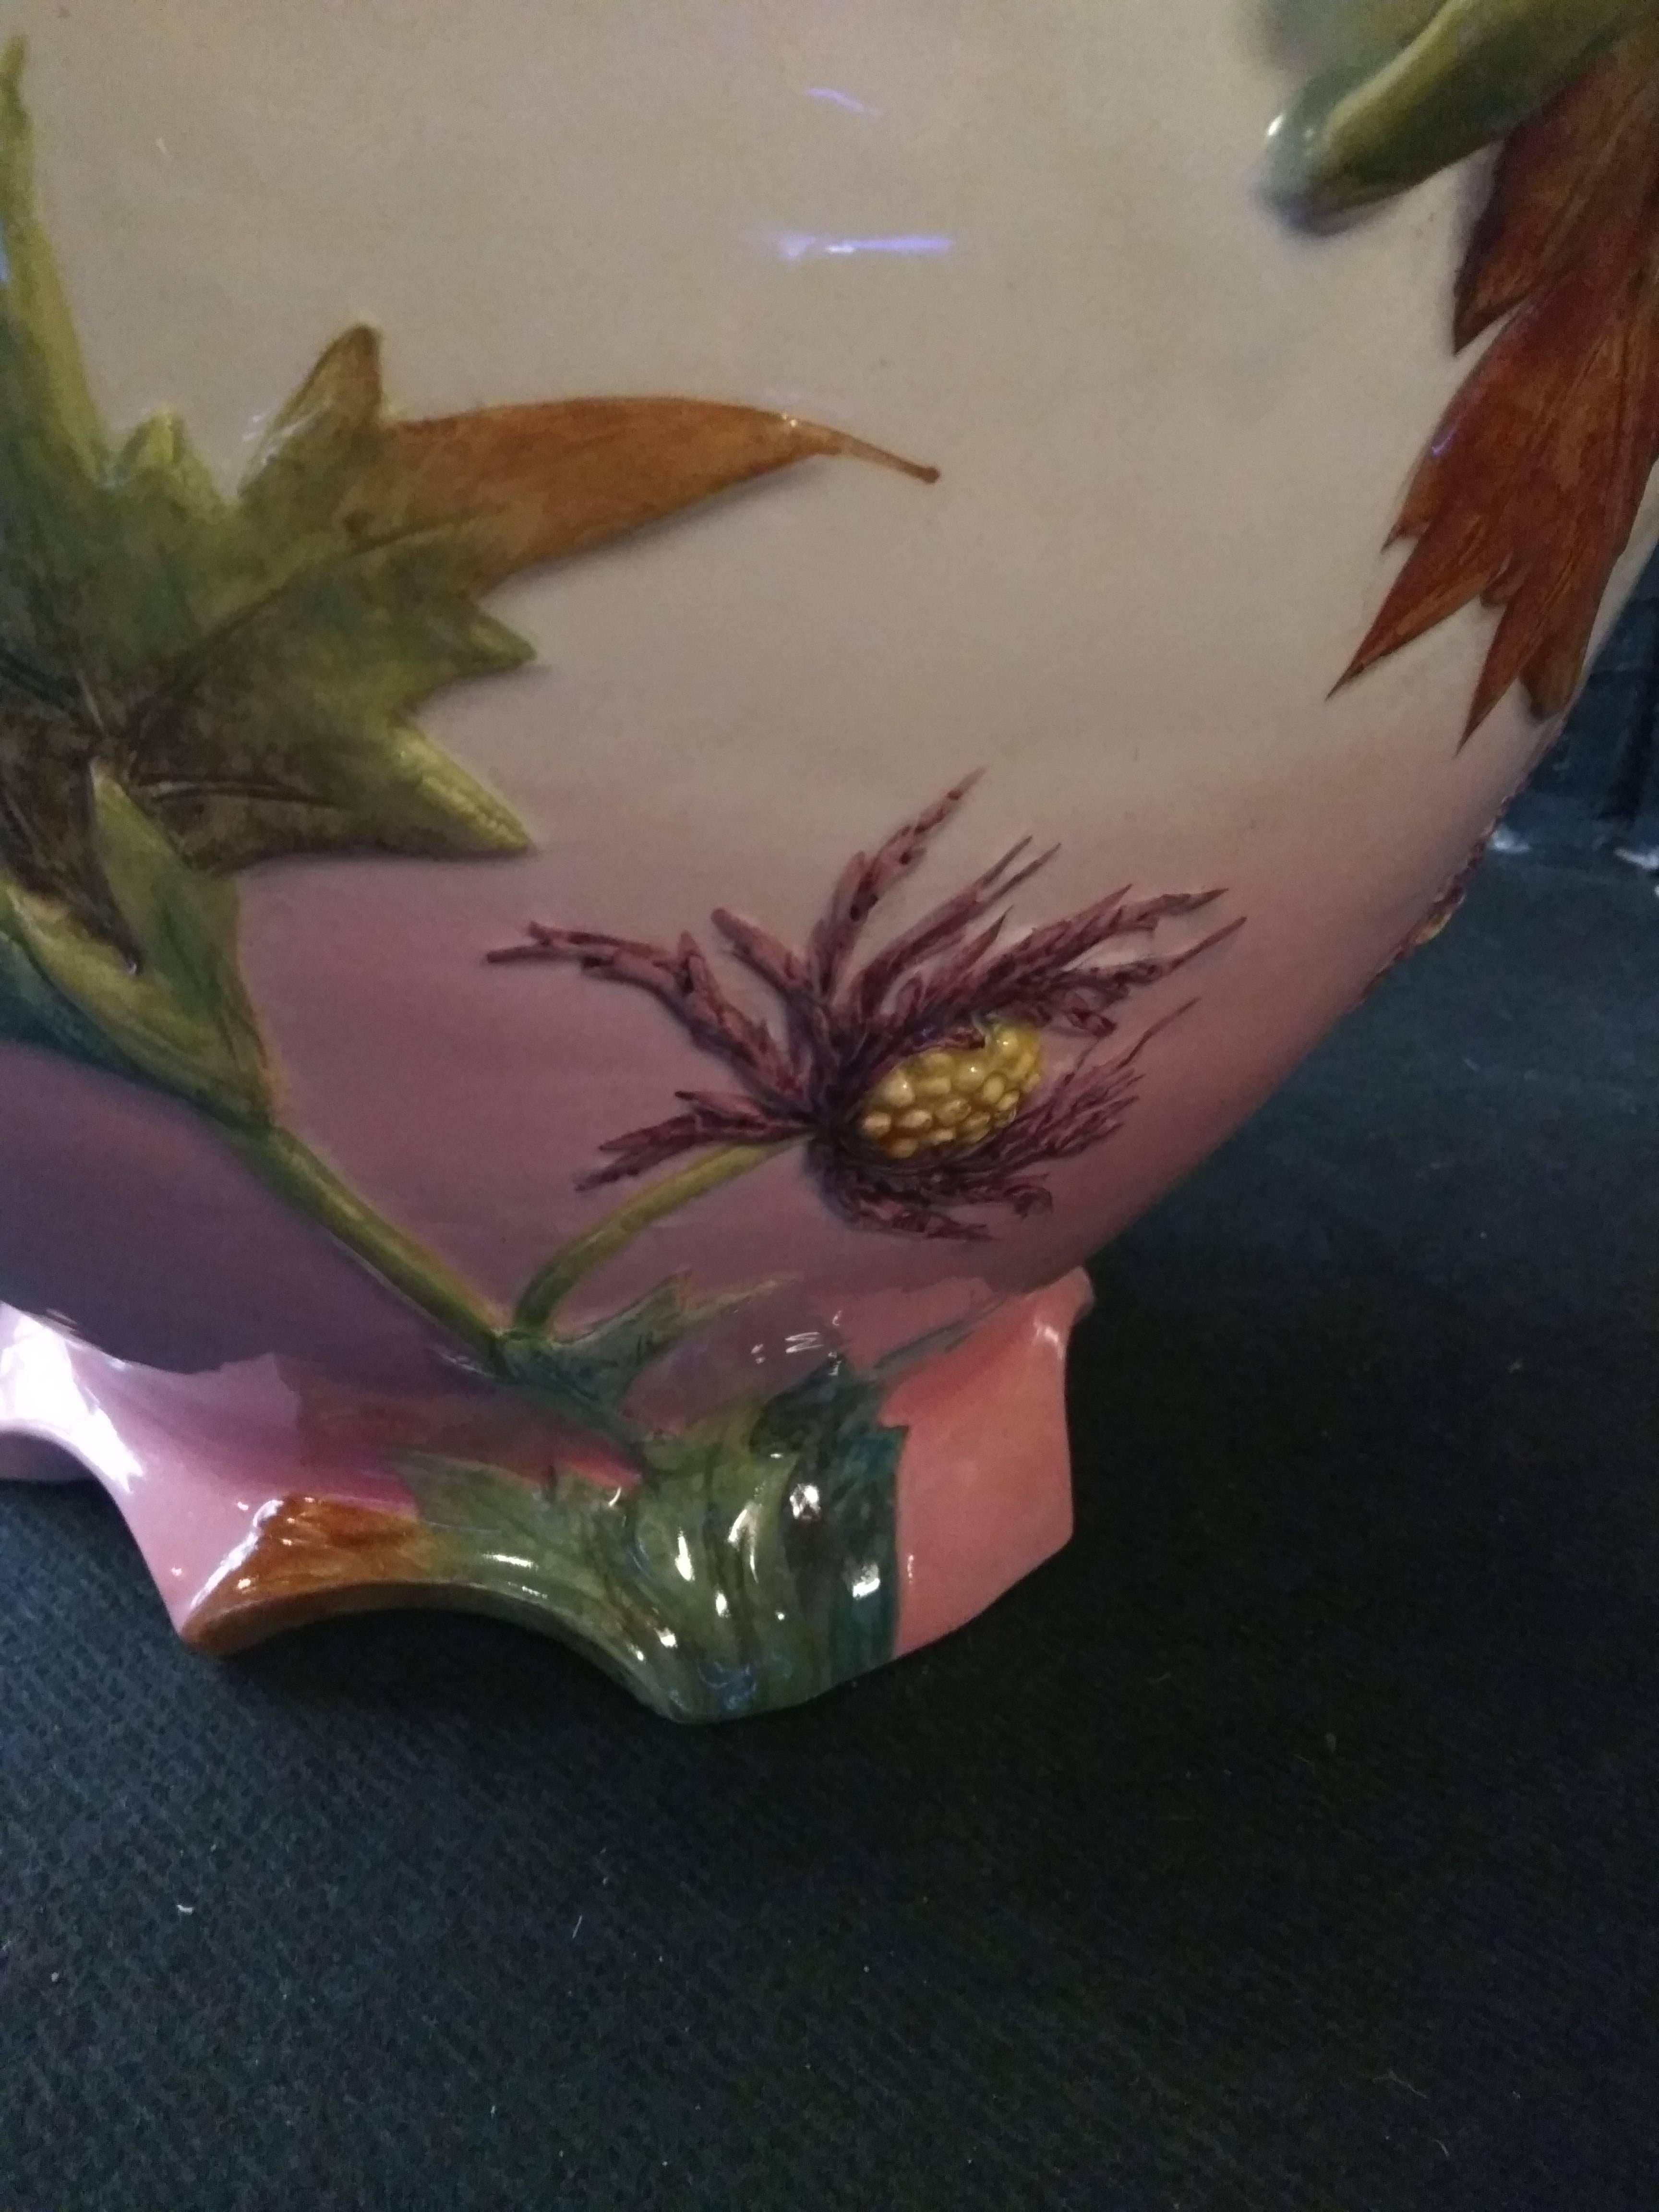 This beautiful planter with thistles is a reminiscent of the Mediterranean majolica tradition. Our piece expresses with exuberance the taste for a local flora. The vase are circular in shape with painted and sculpted decorations of shimmering stems